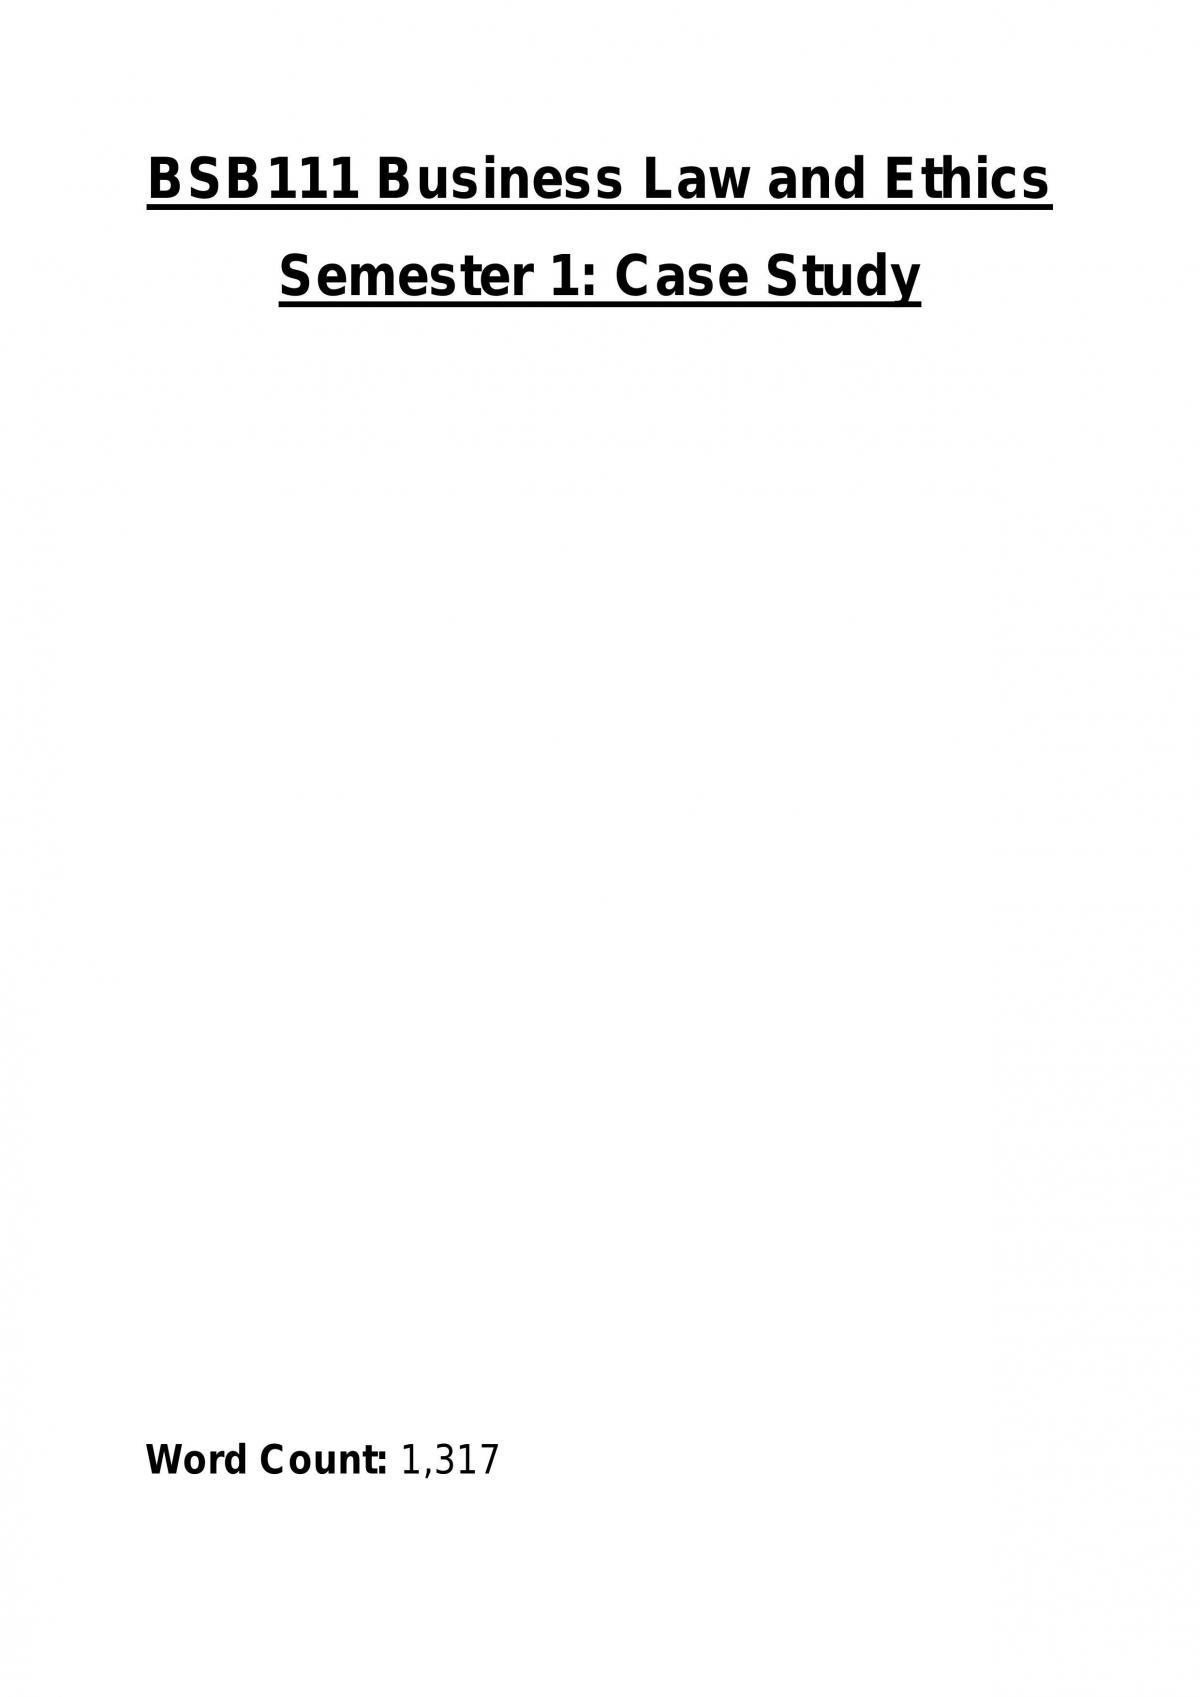 solved case study on business ethics pdf